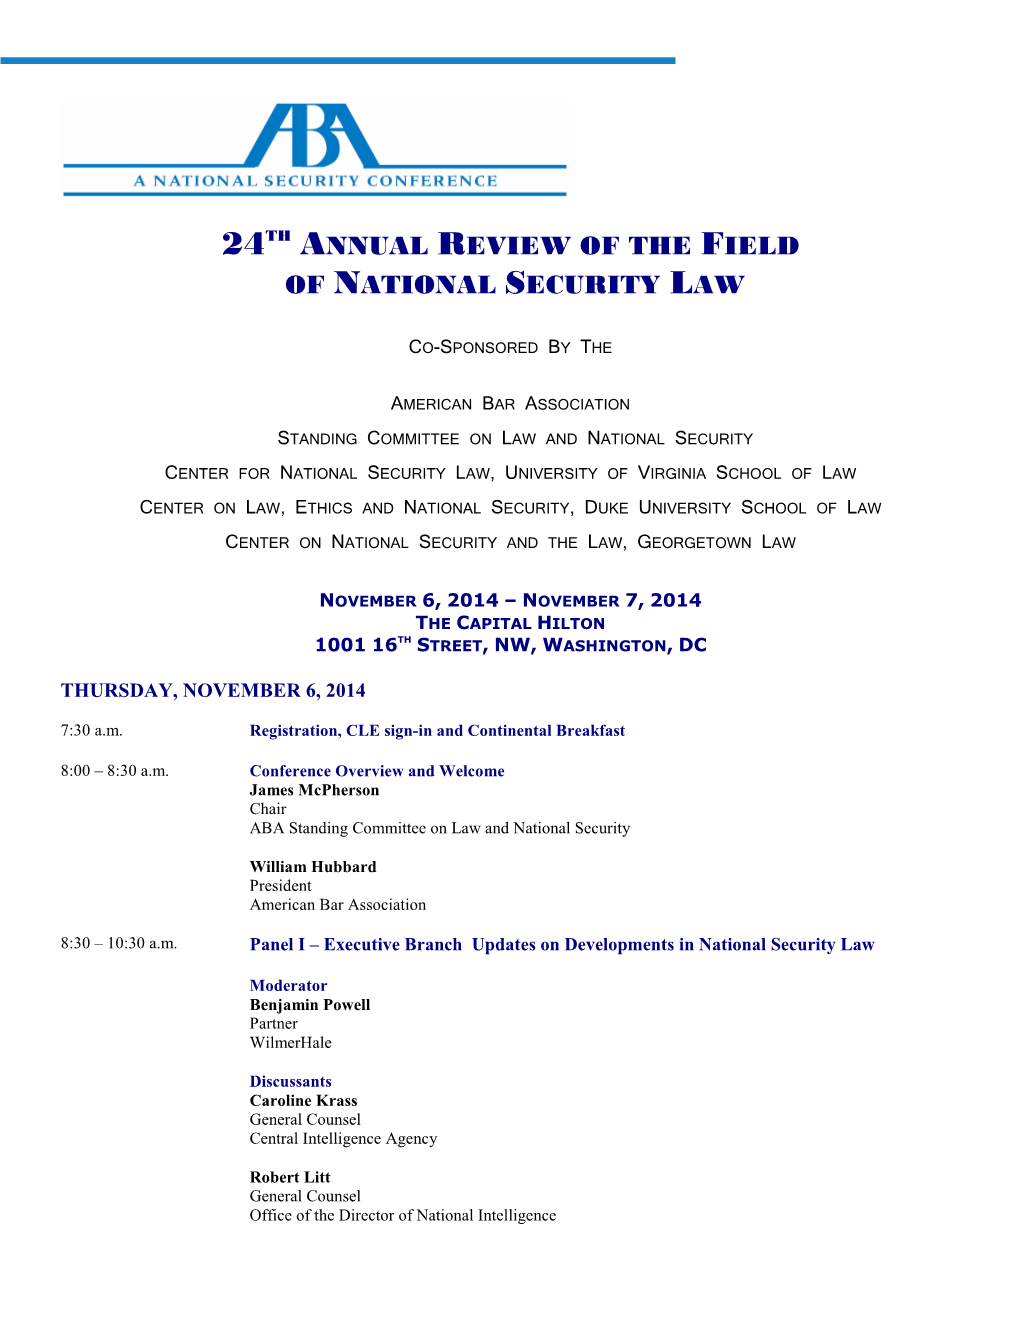 24Th Annual Review of the Field of National Security Law